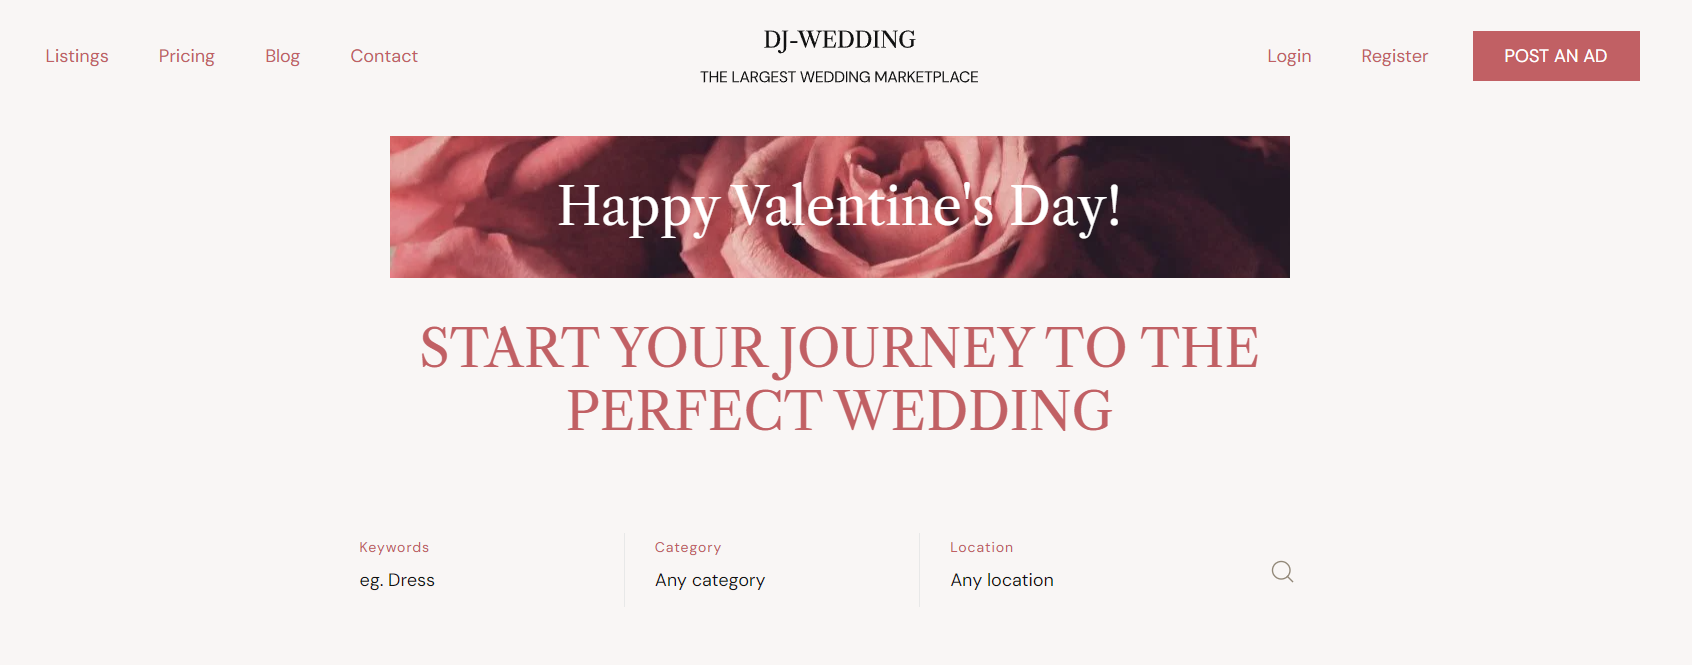 valentines day inspired template based on yootheme pro and dj-wedding joomla template hero image example